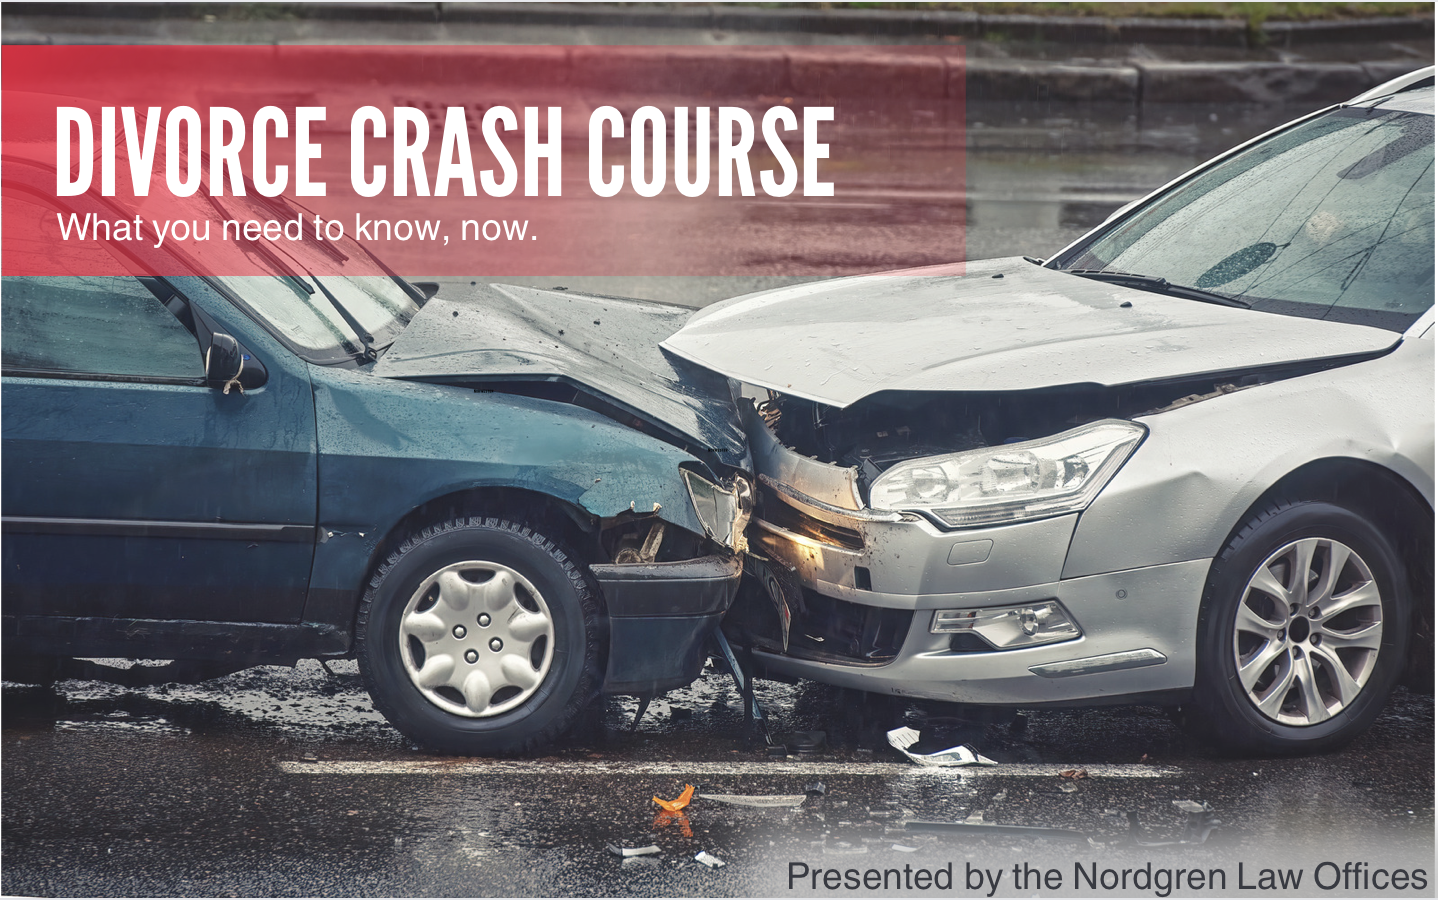 Divorce Crash Course: Two vehicles colliding with one another